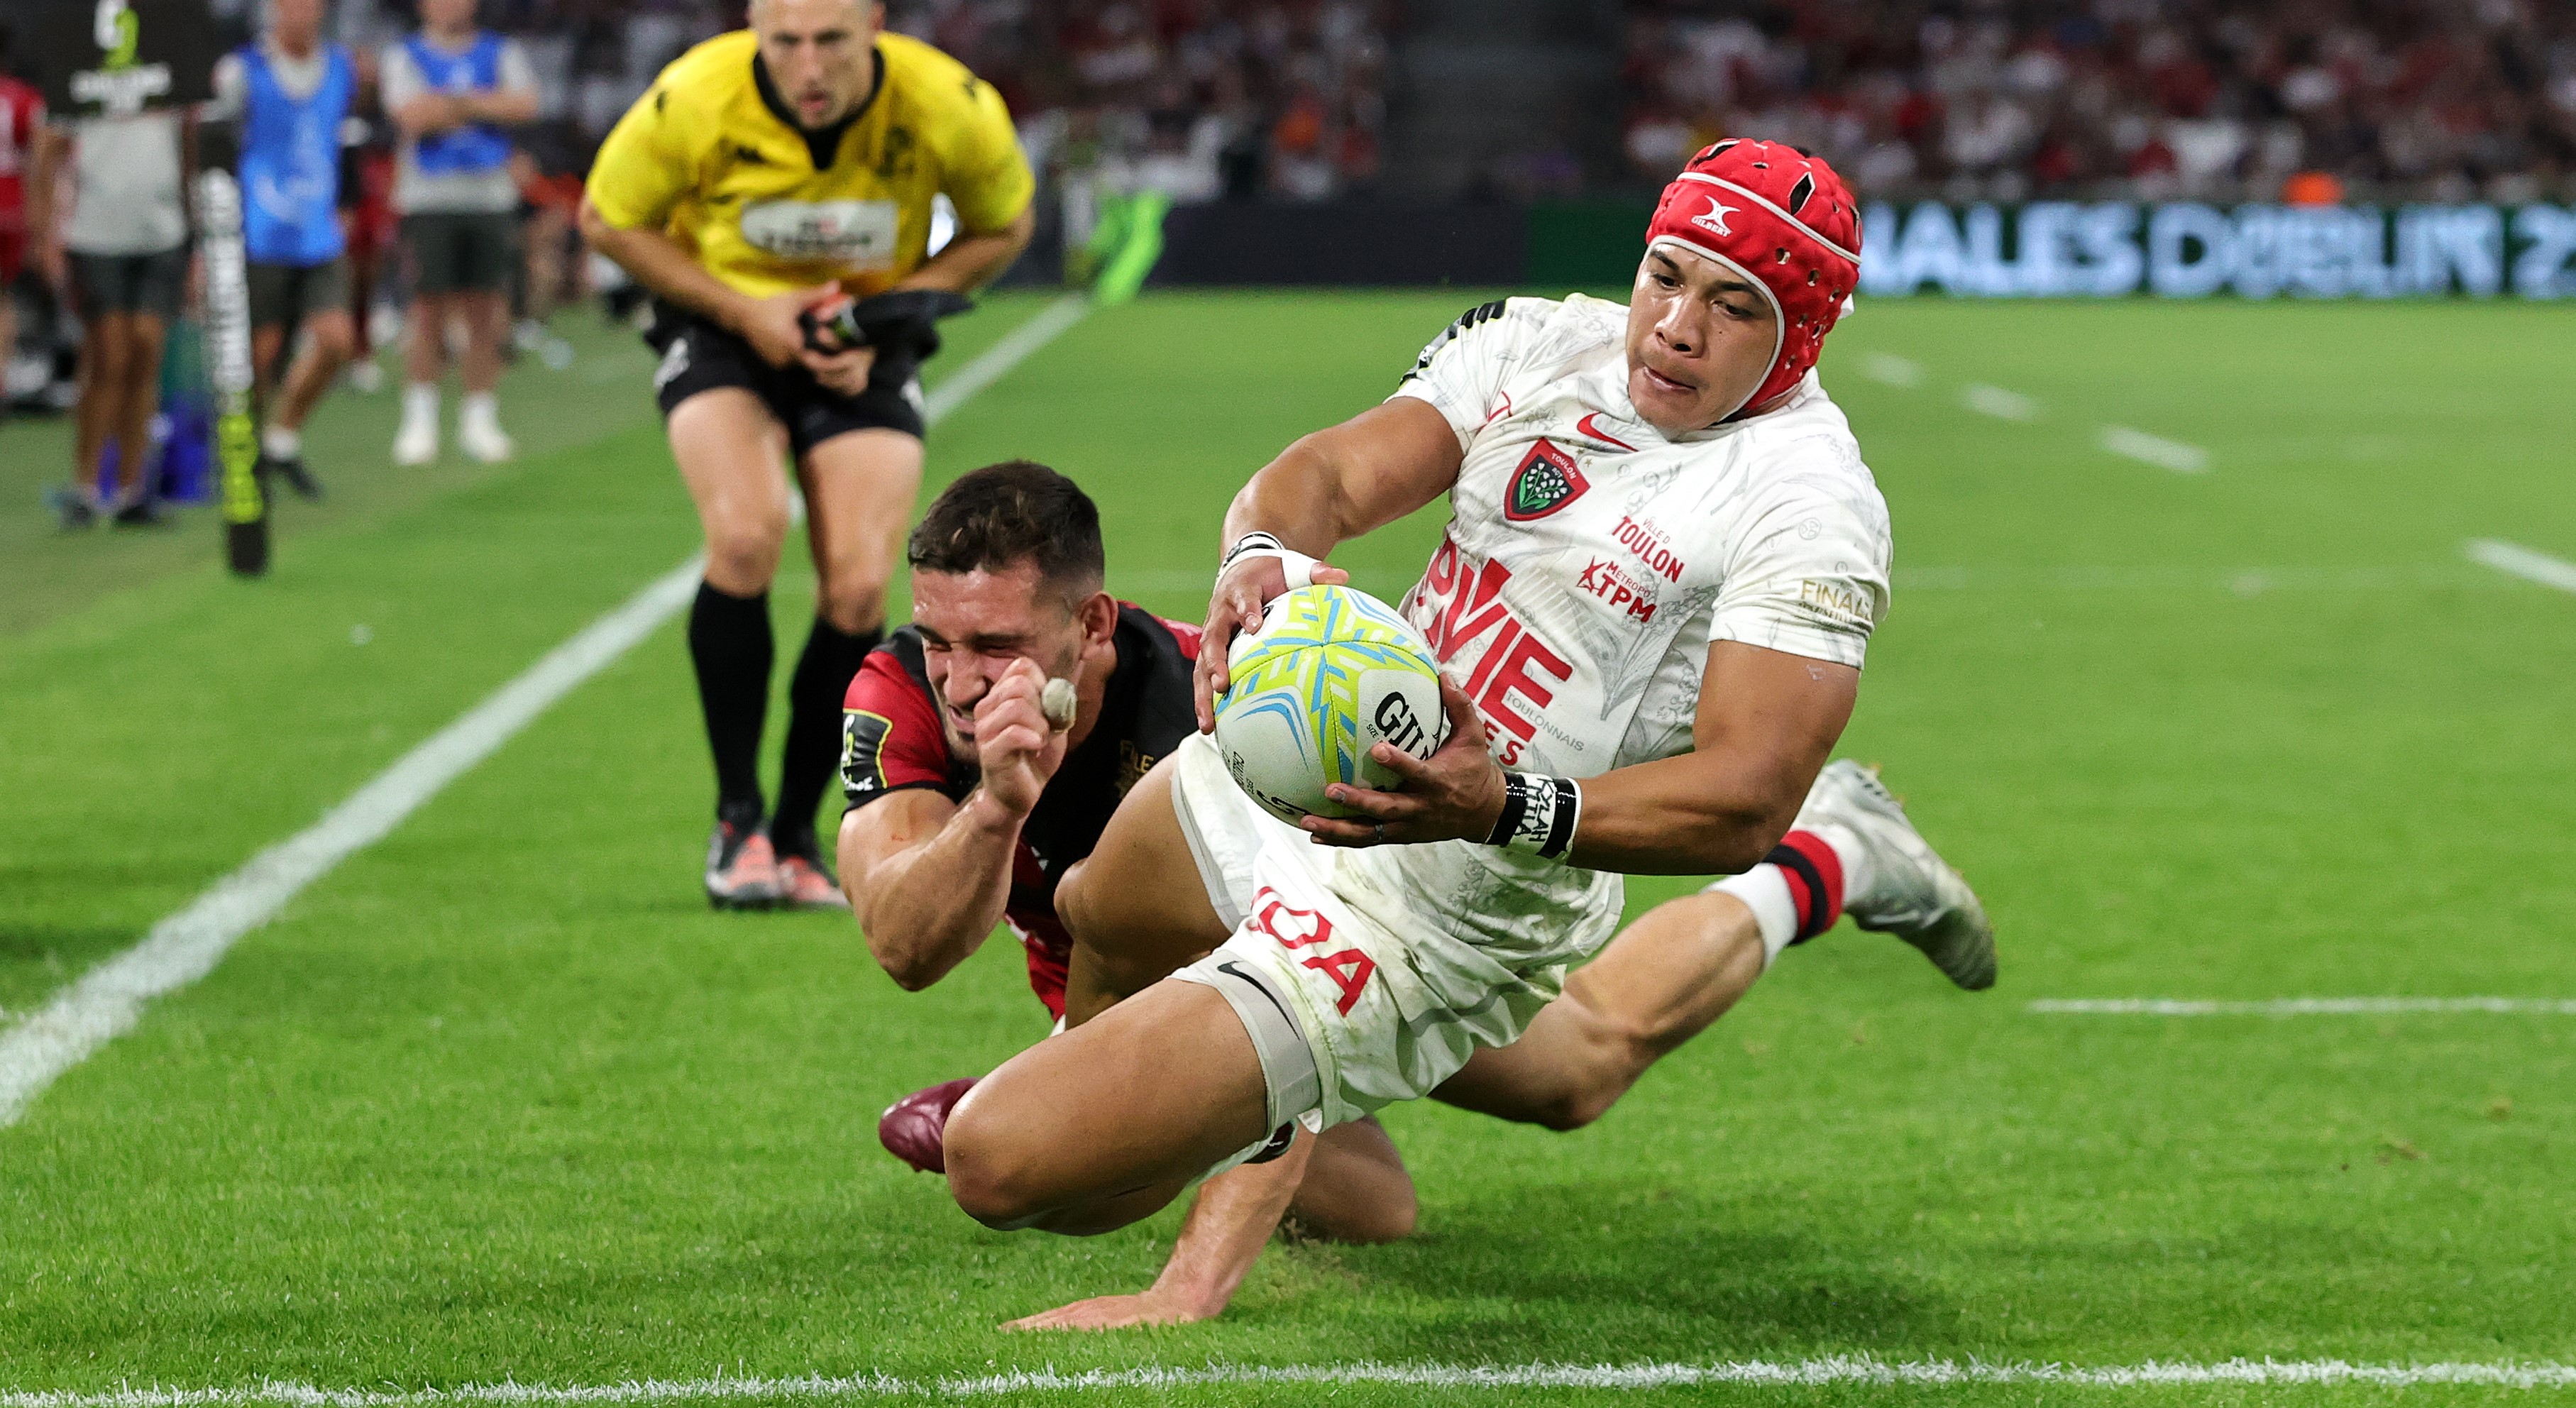 MARSEILLE, FRANCE - MAY 27: Cheslin Kolbe of Toulon goes over to score their side's second try during the EPCR Challenge Cup Final match between Lyon and RC Toulon at Stade Velodrome on May 27, 2022 in Marseille, . (Photo by David Rogers/Getty Images)